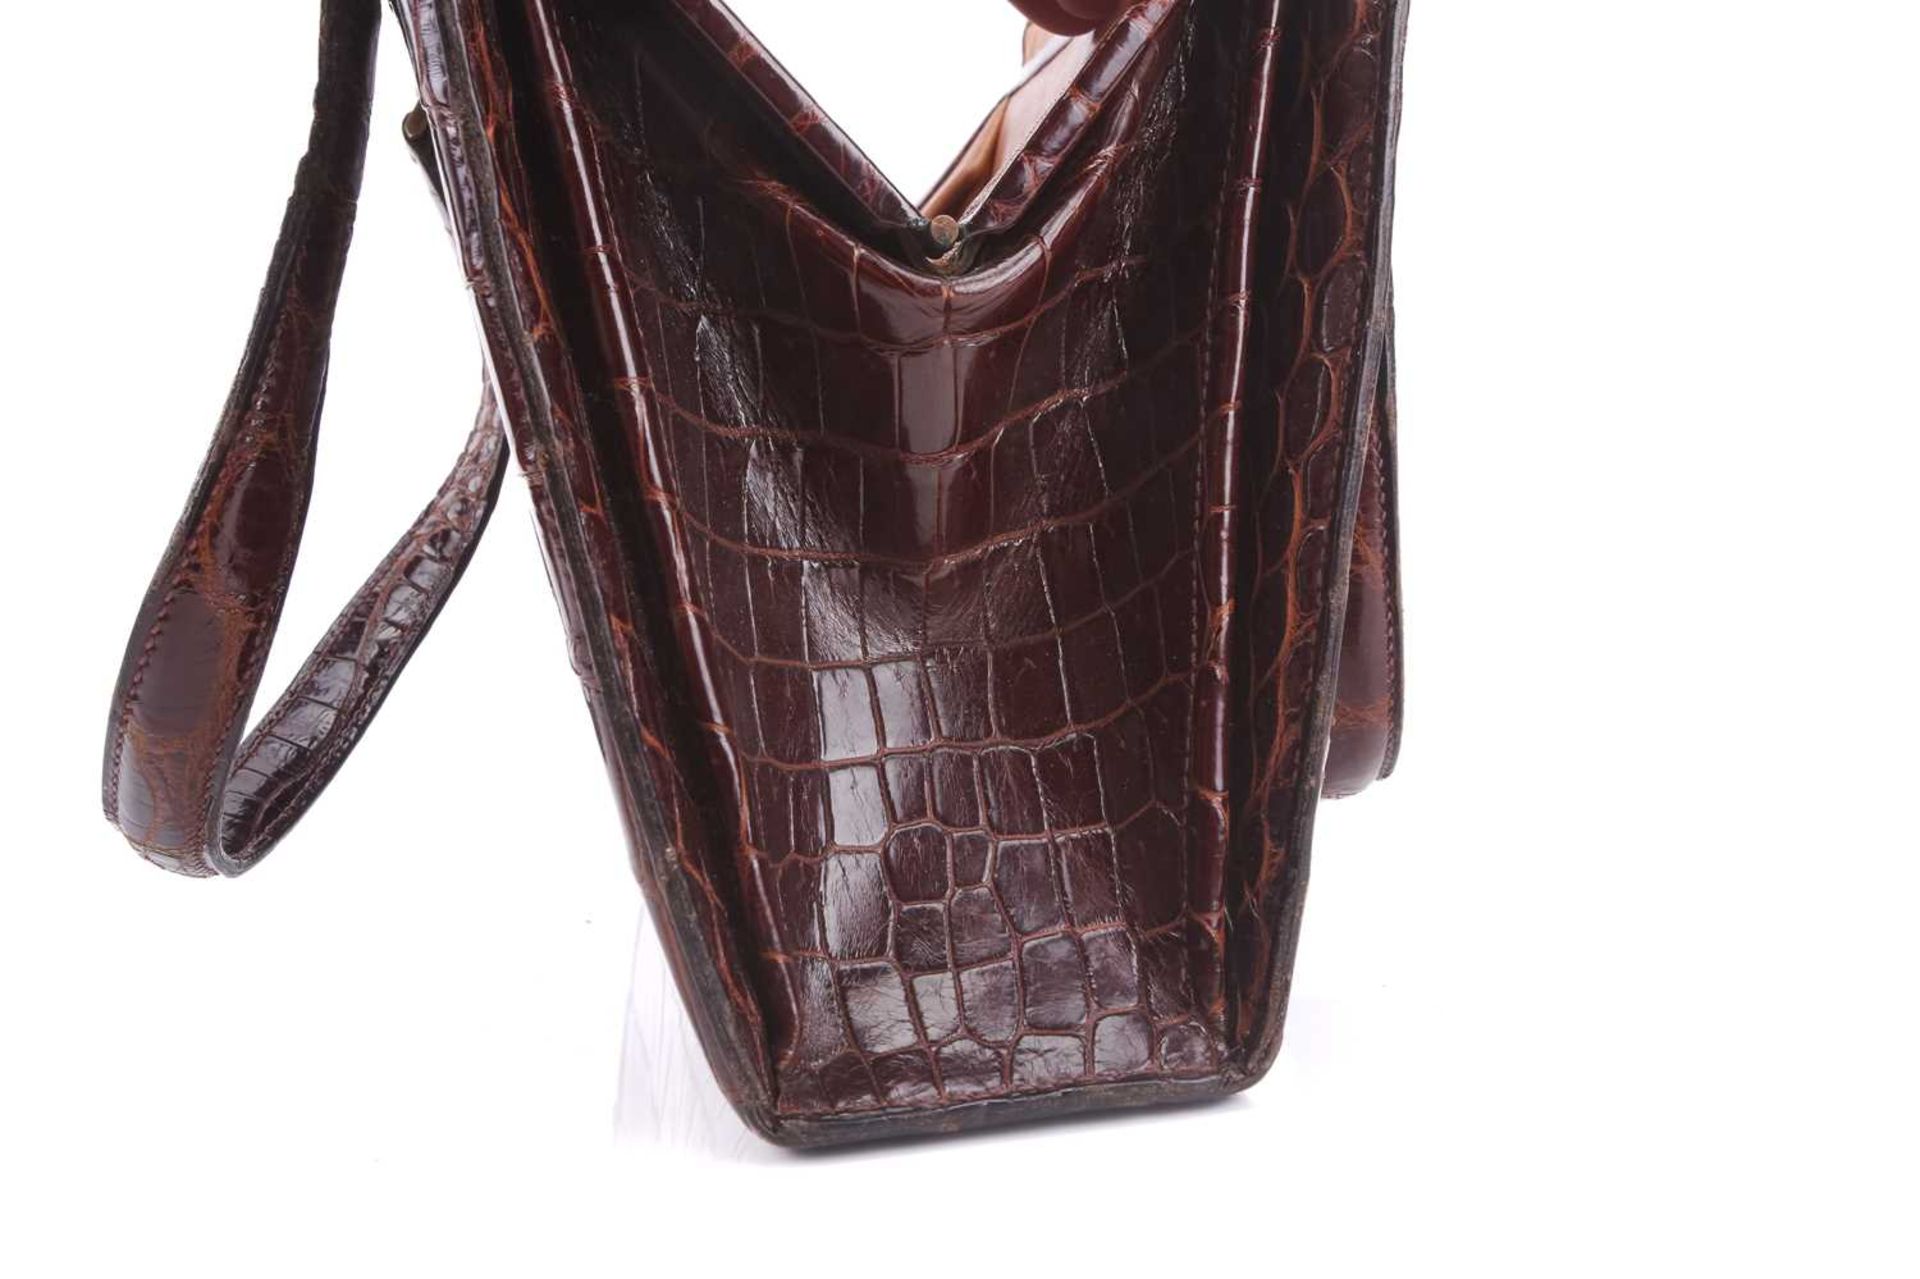 Hermès - a 'Pullman' handbag in brown crocodile skin, circa late 1930, a leather-lined structured - Image 5 of 12